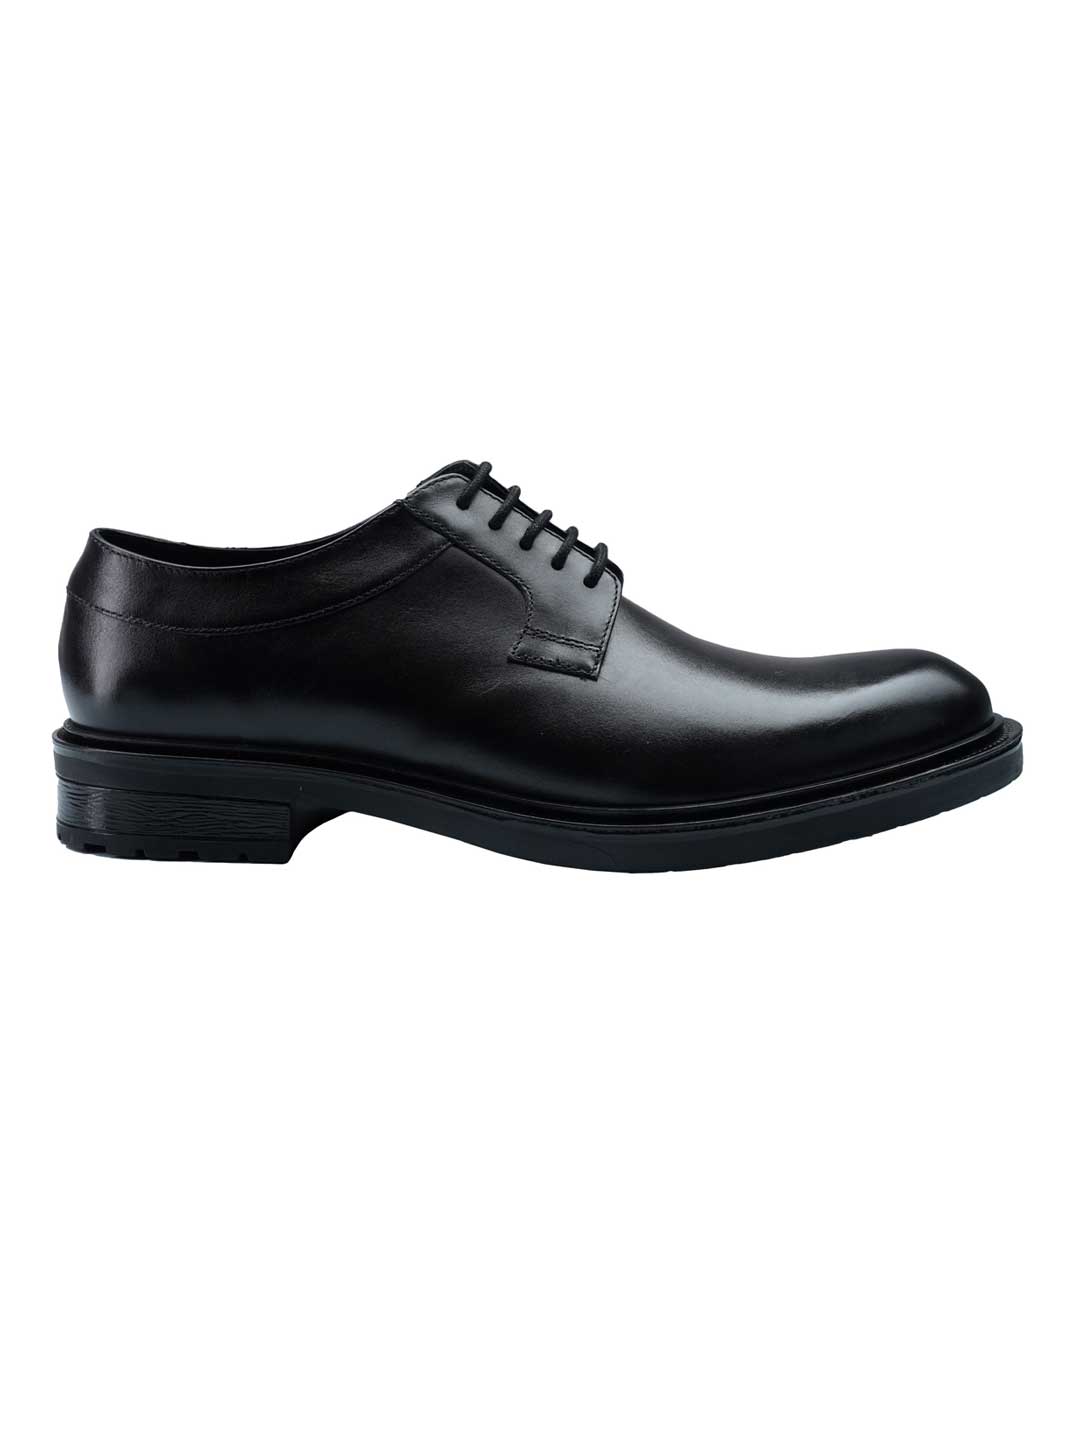 Semi Formal Shoes - Buy Semi Formal Shoes Online in India